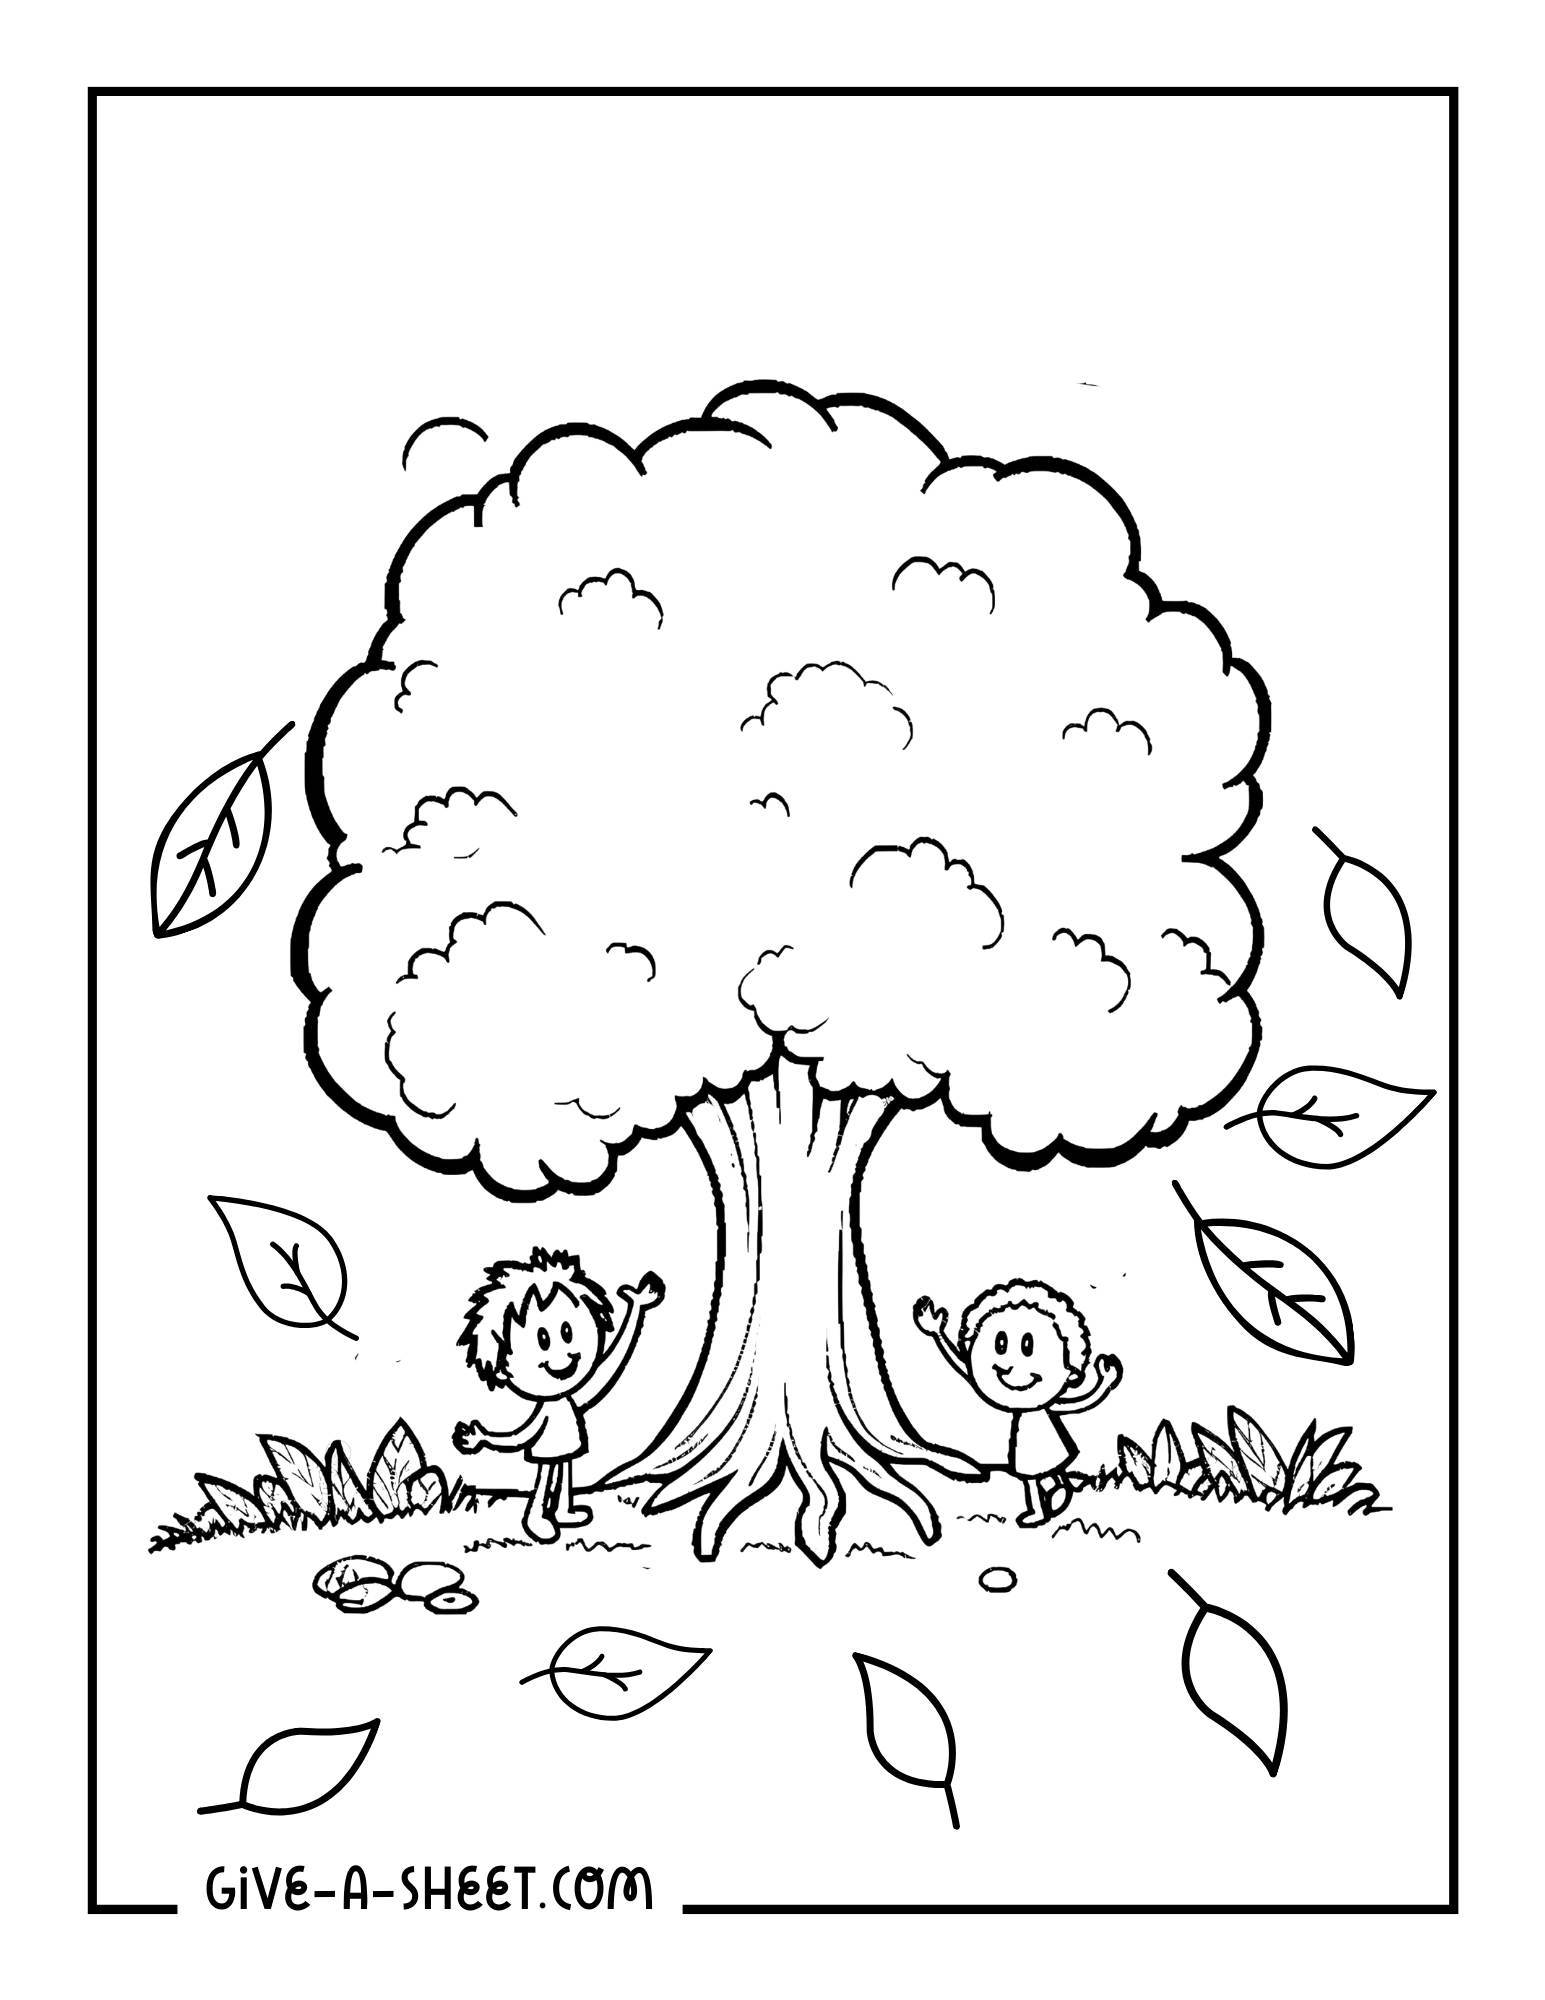 Autumn leaves tree coloring page for kids.